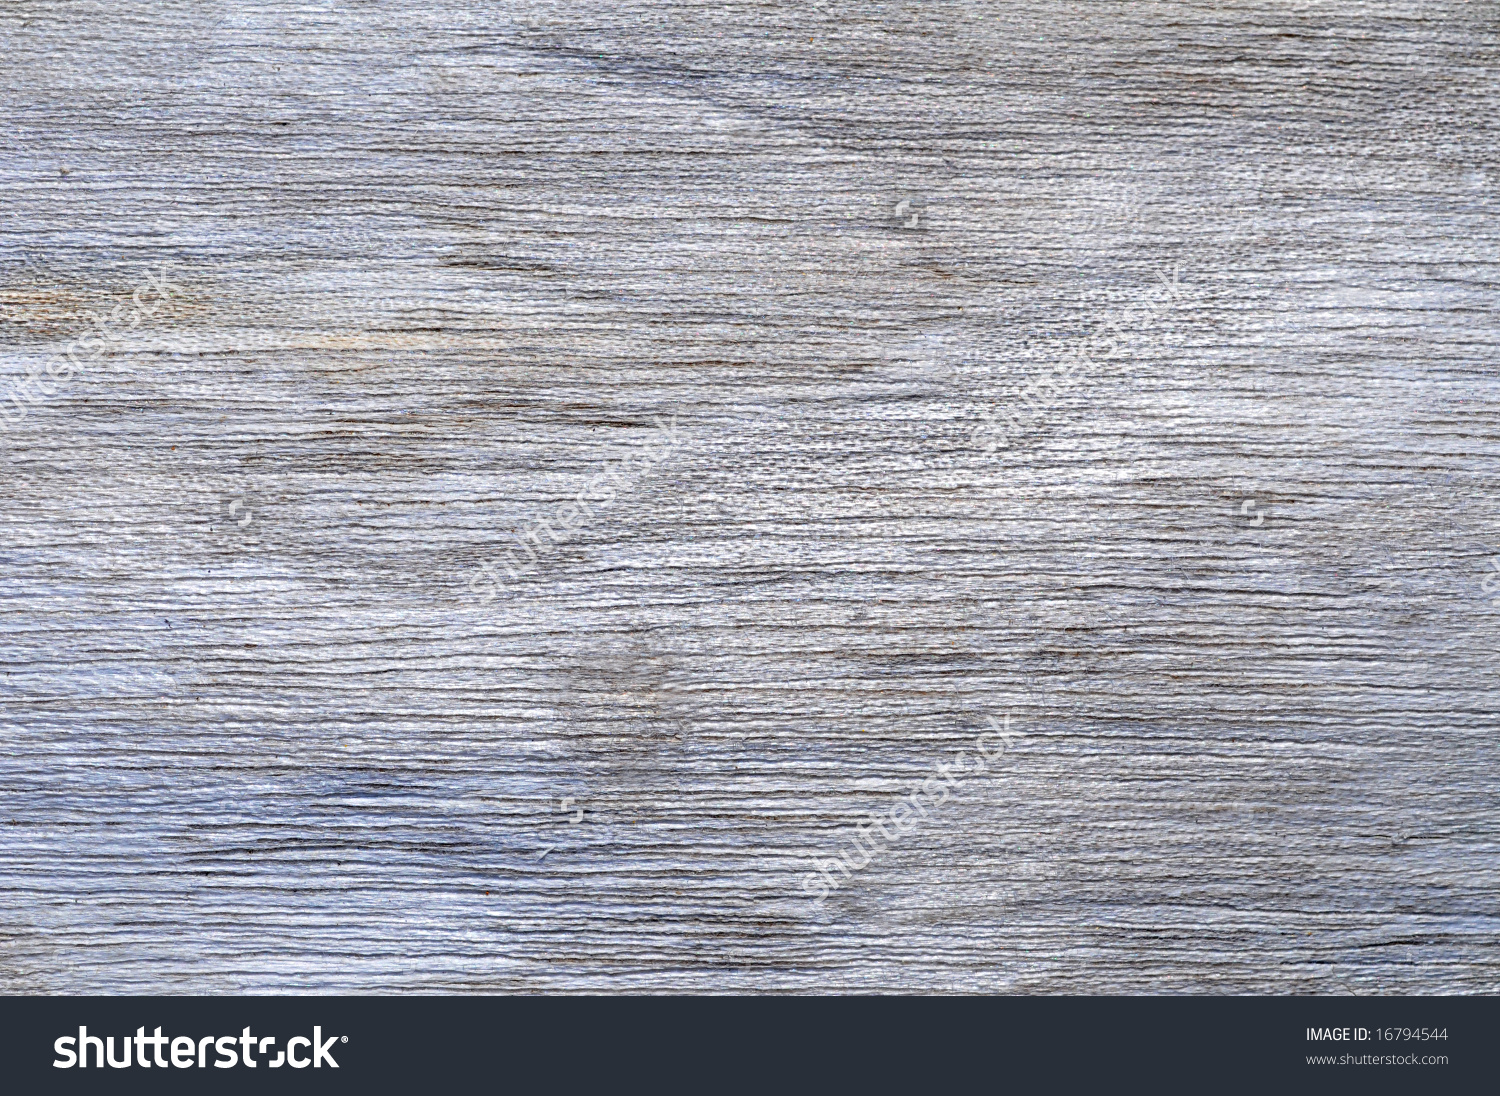 Bleached Driftwood Texture Stock Photo 16794544.